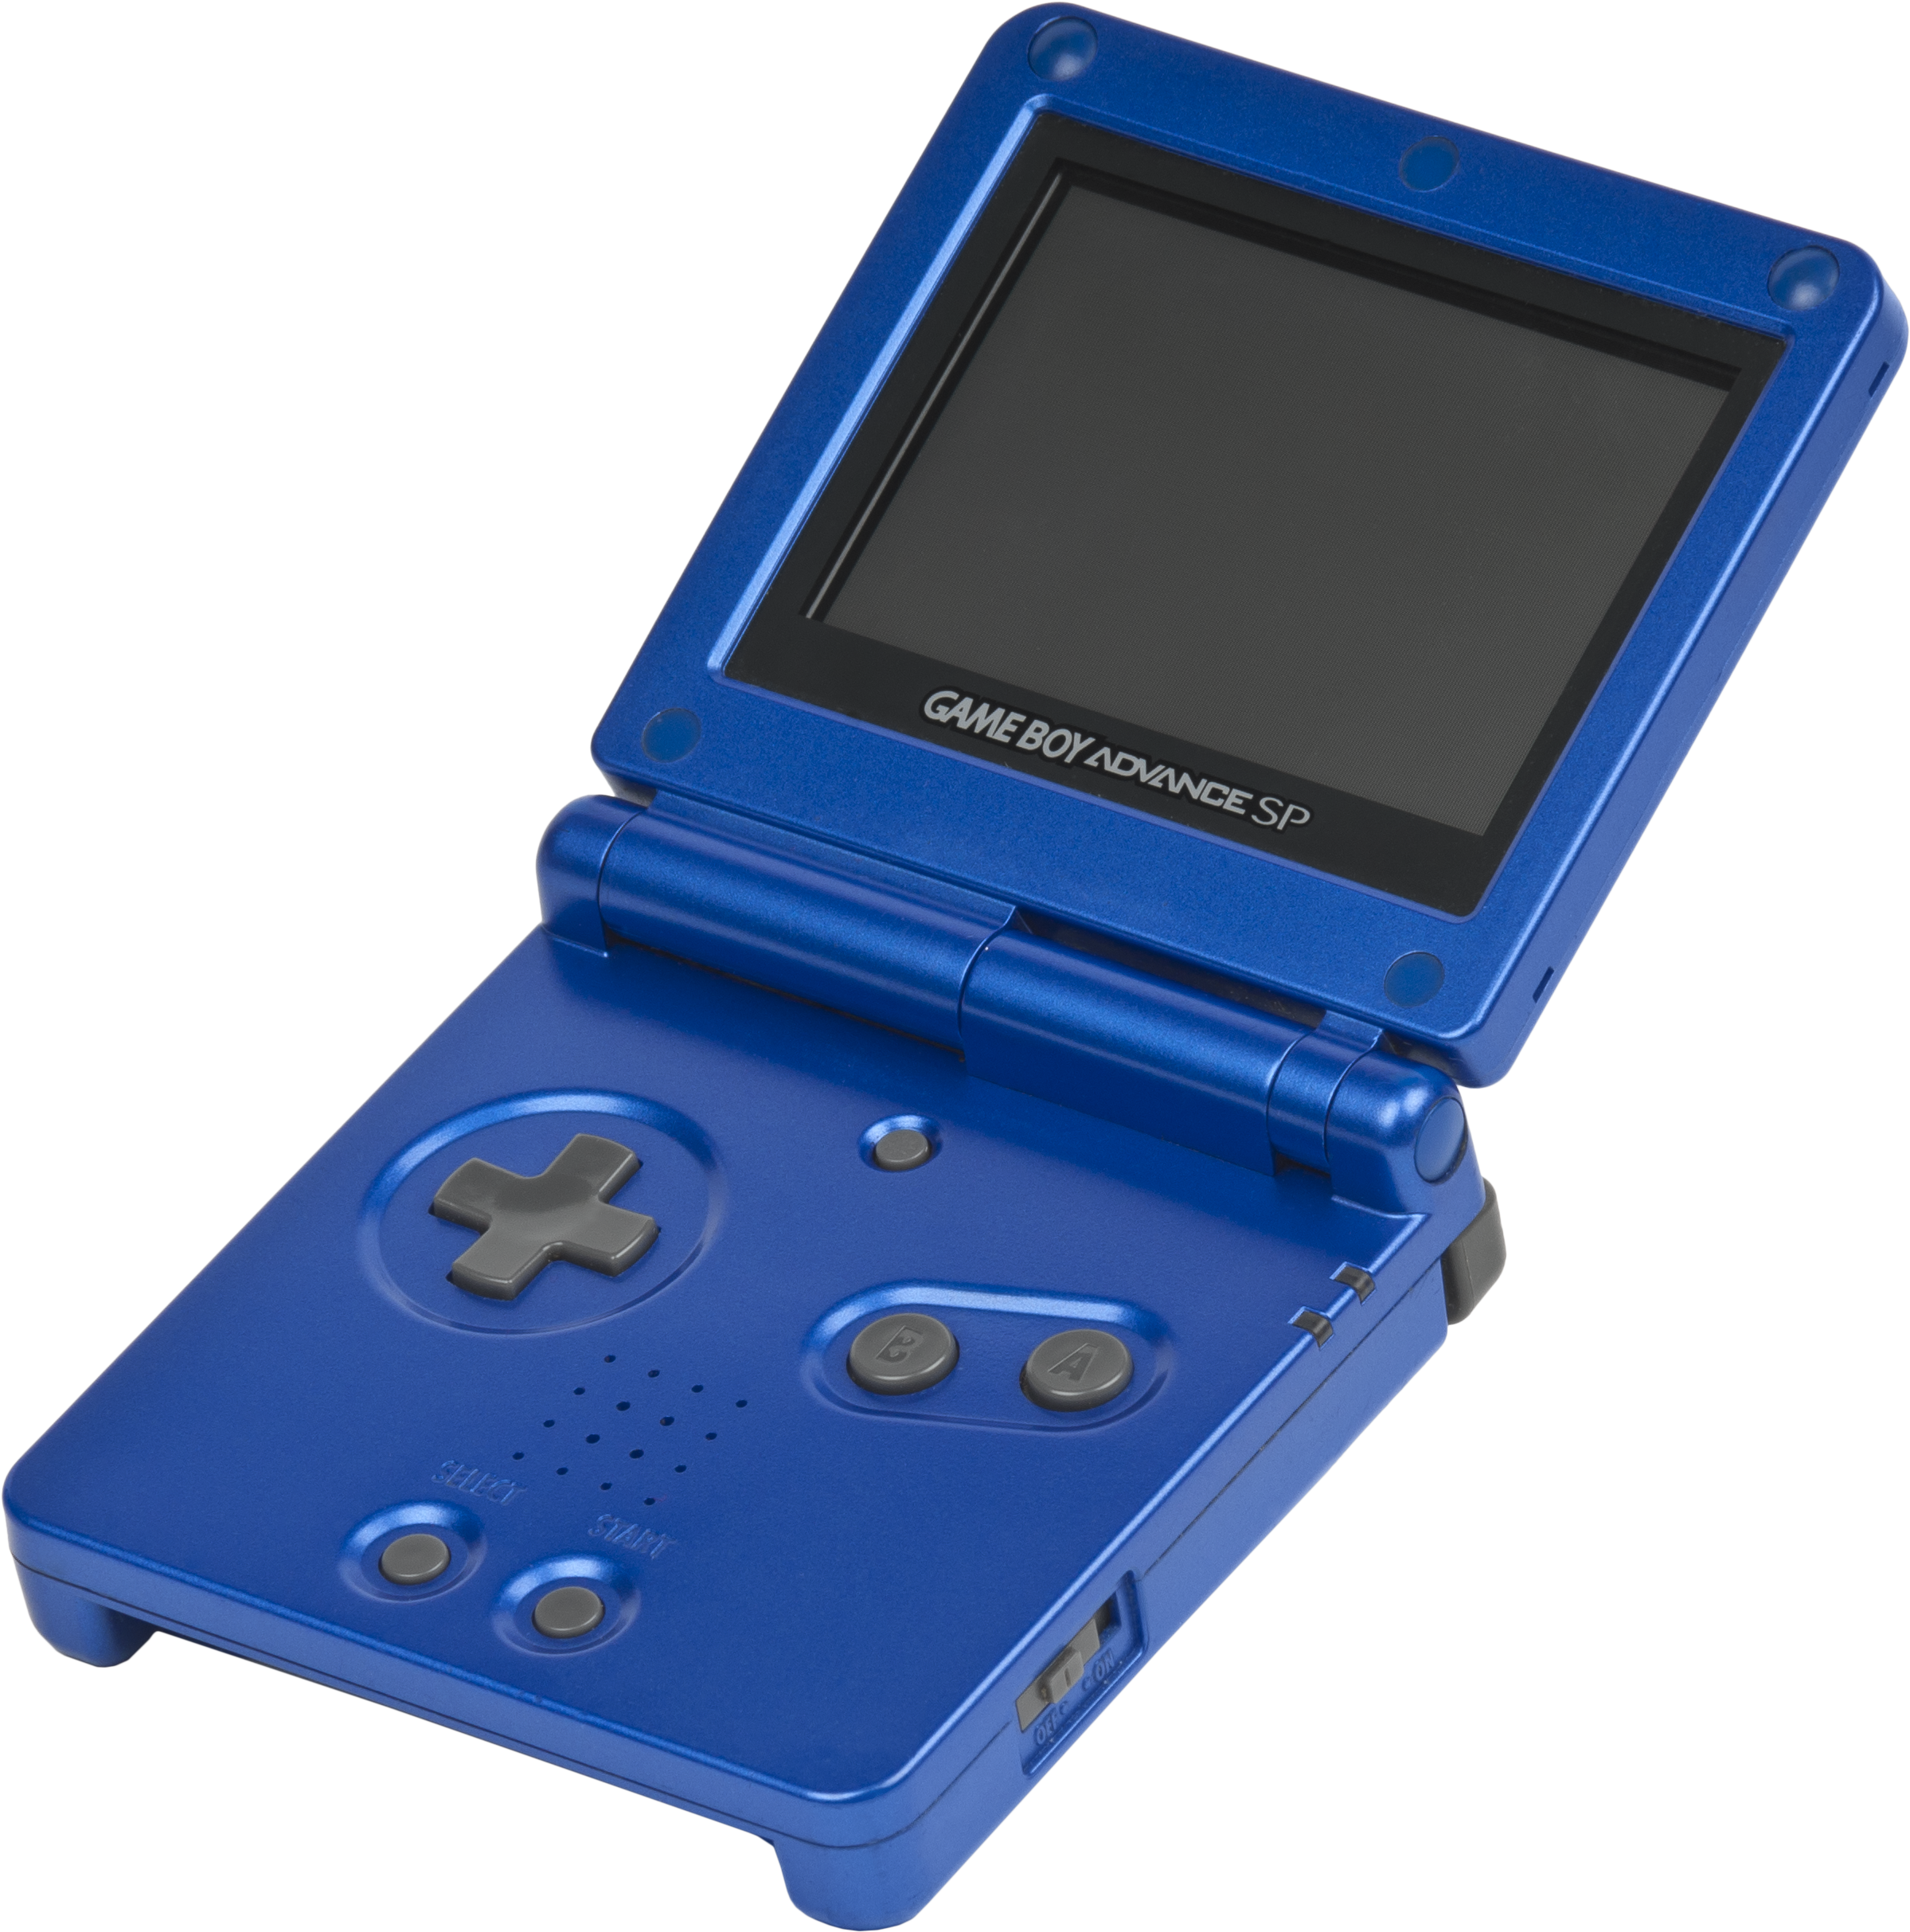 A Blue Handheld Gaming Device